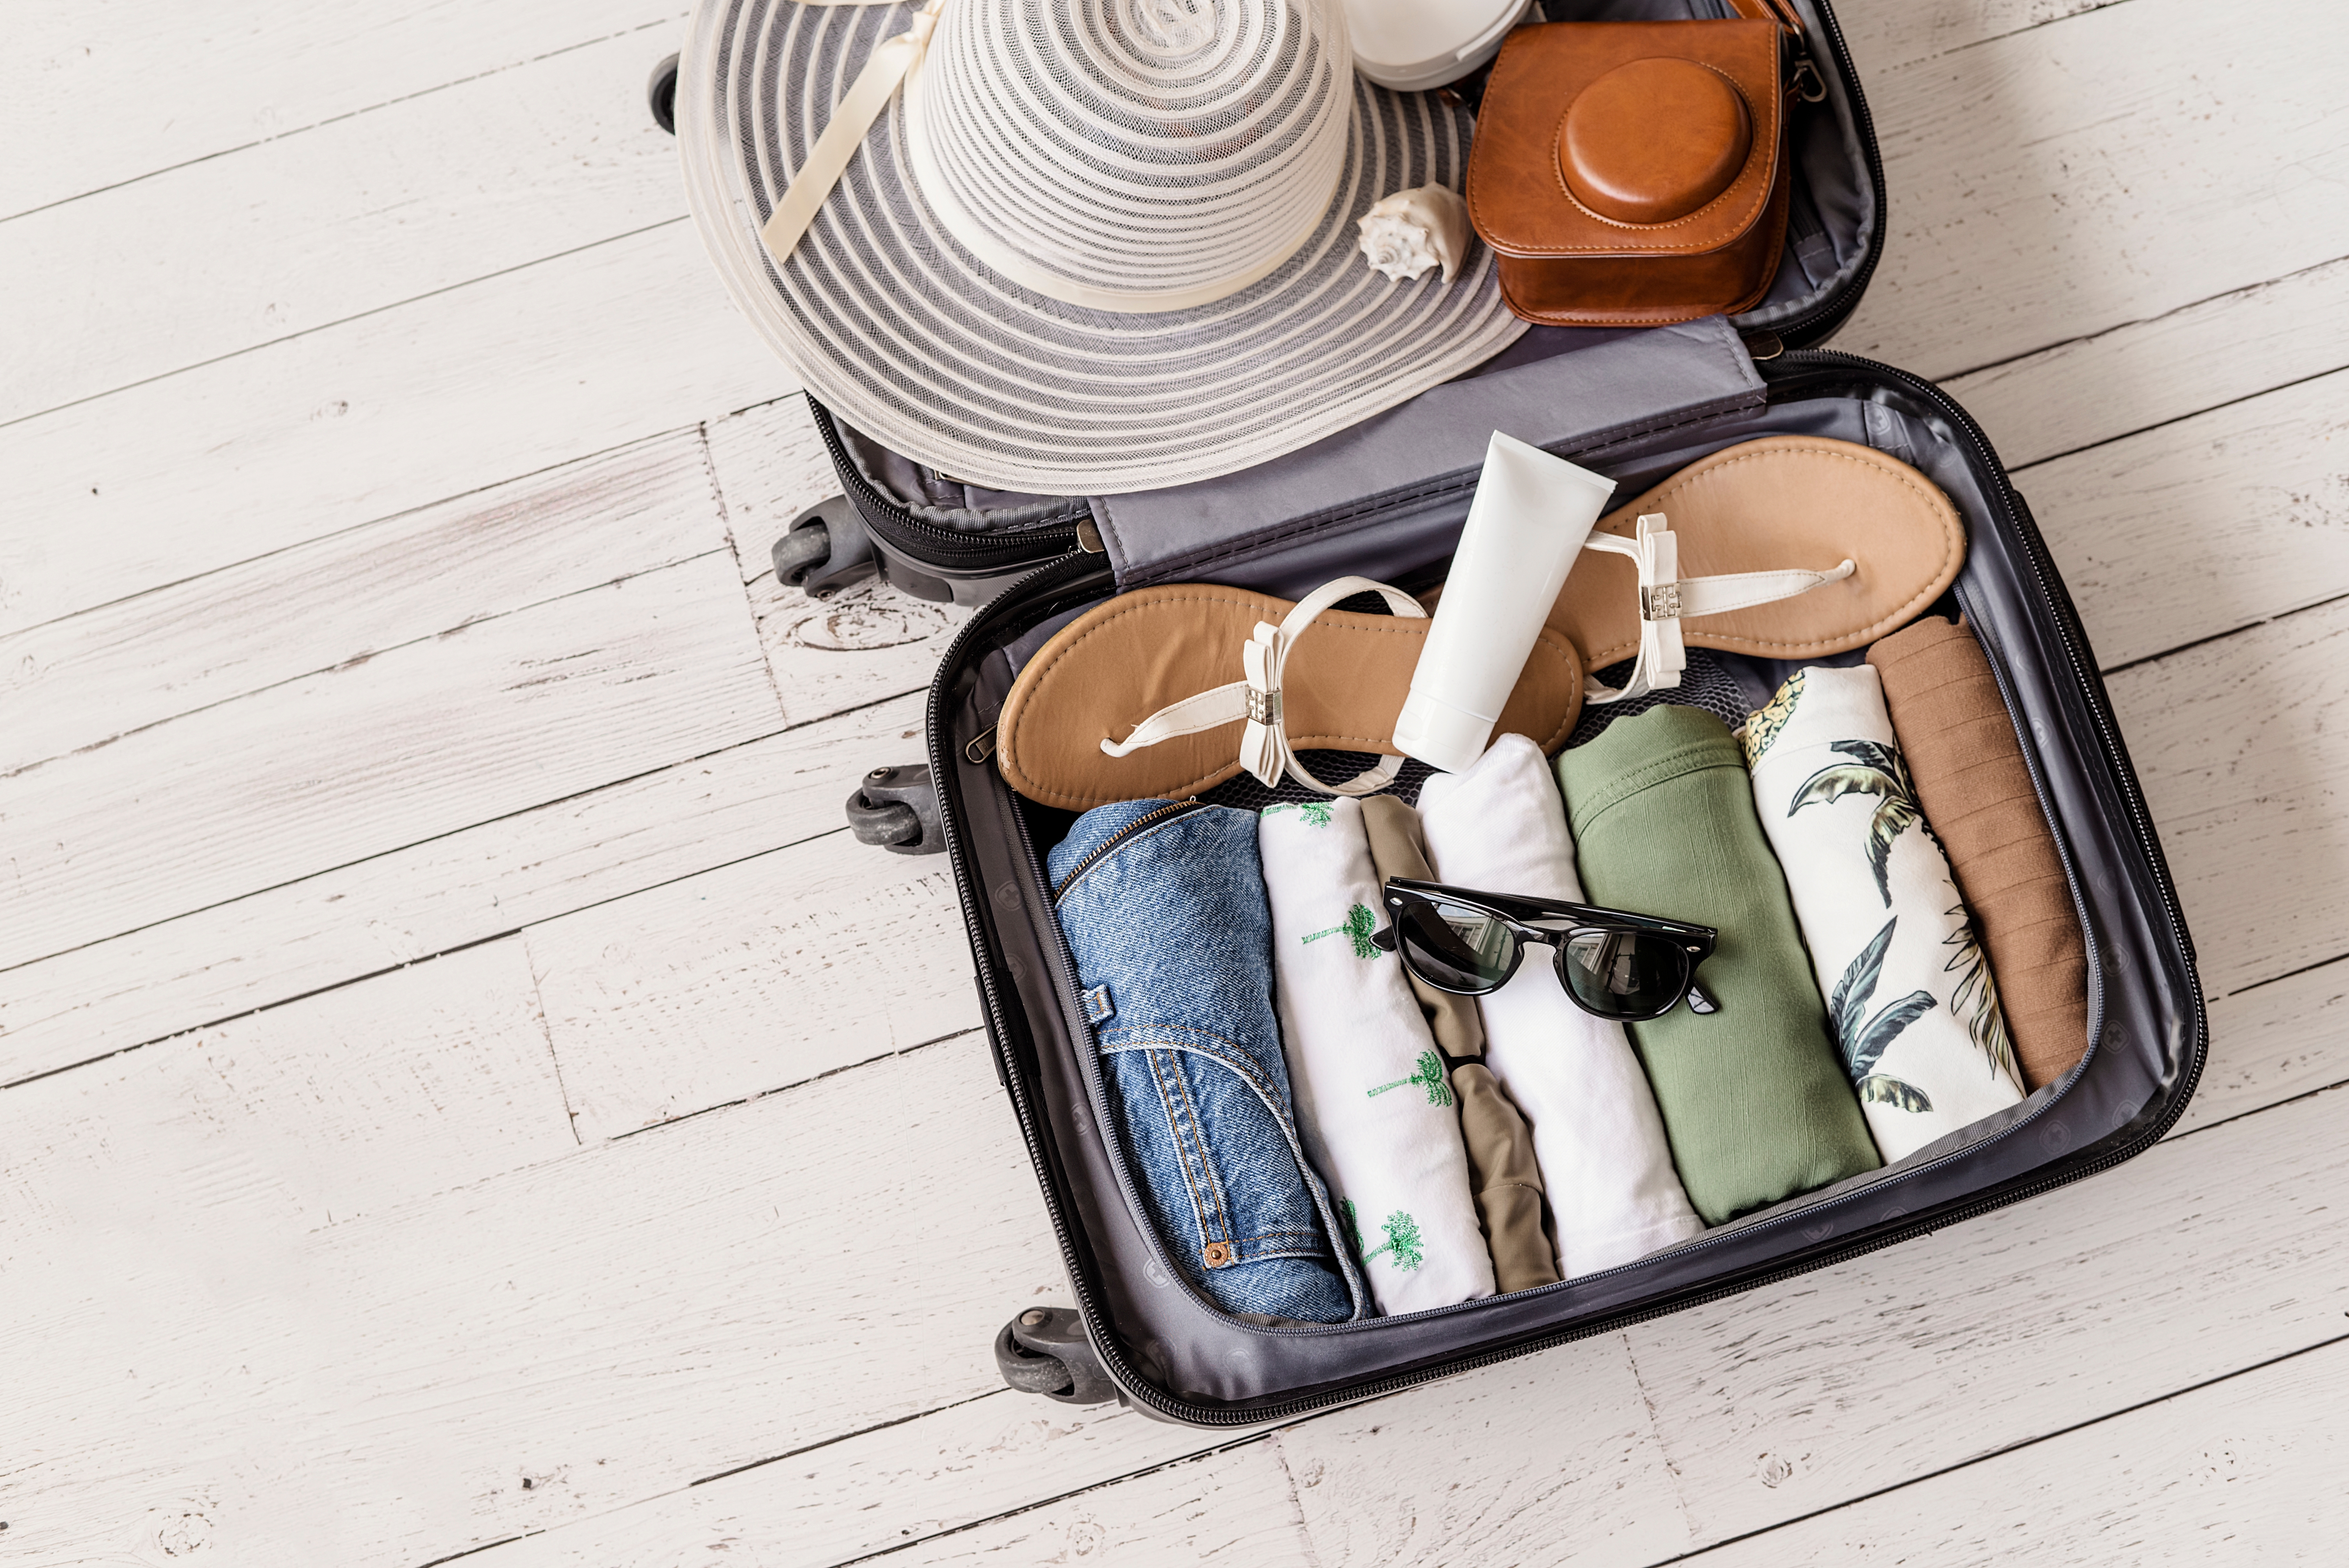 A packed suitcase | Source: Shutterstock